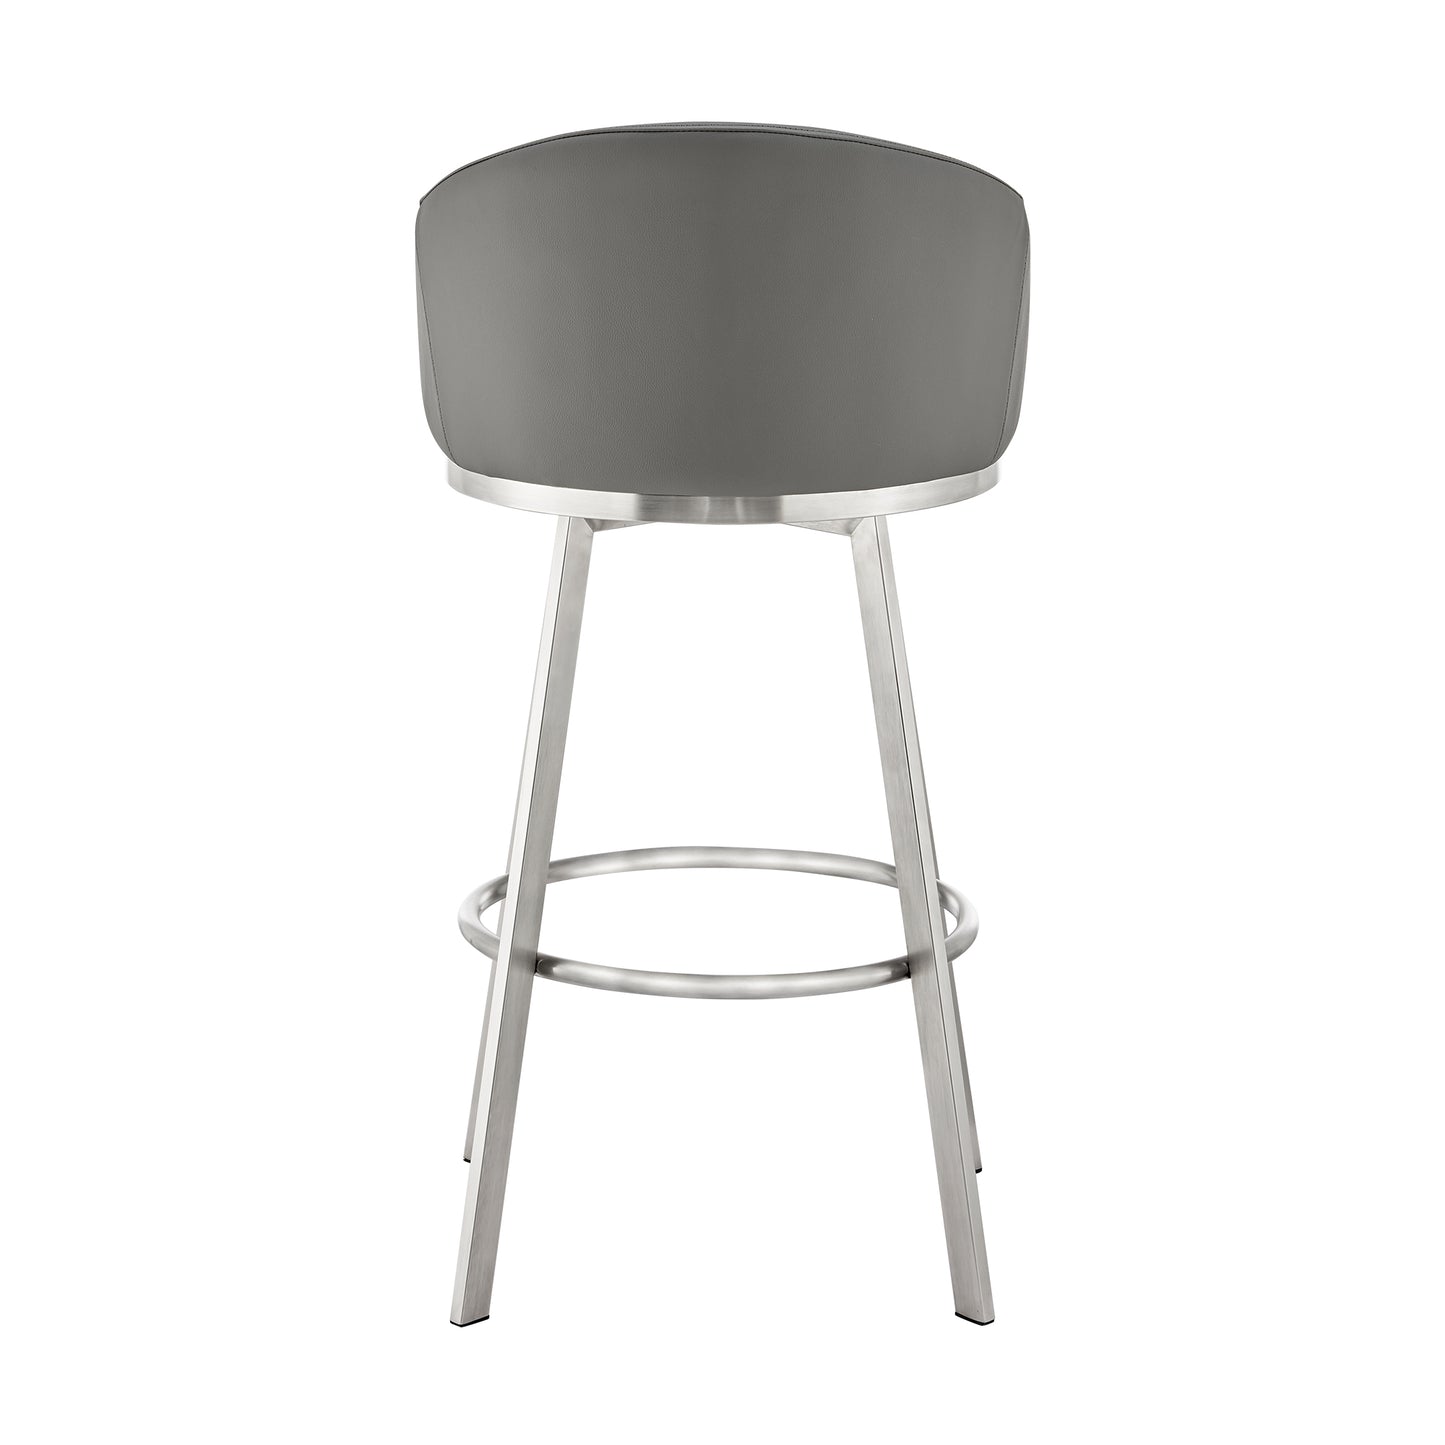 Eleanor 26" Swivel Counter Stool in Brushed Stainless Steel with Gray Faux Leather